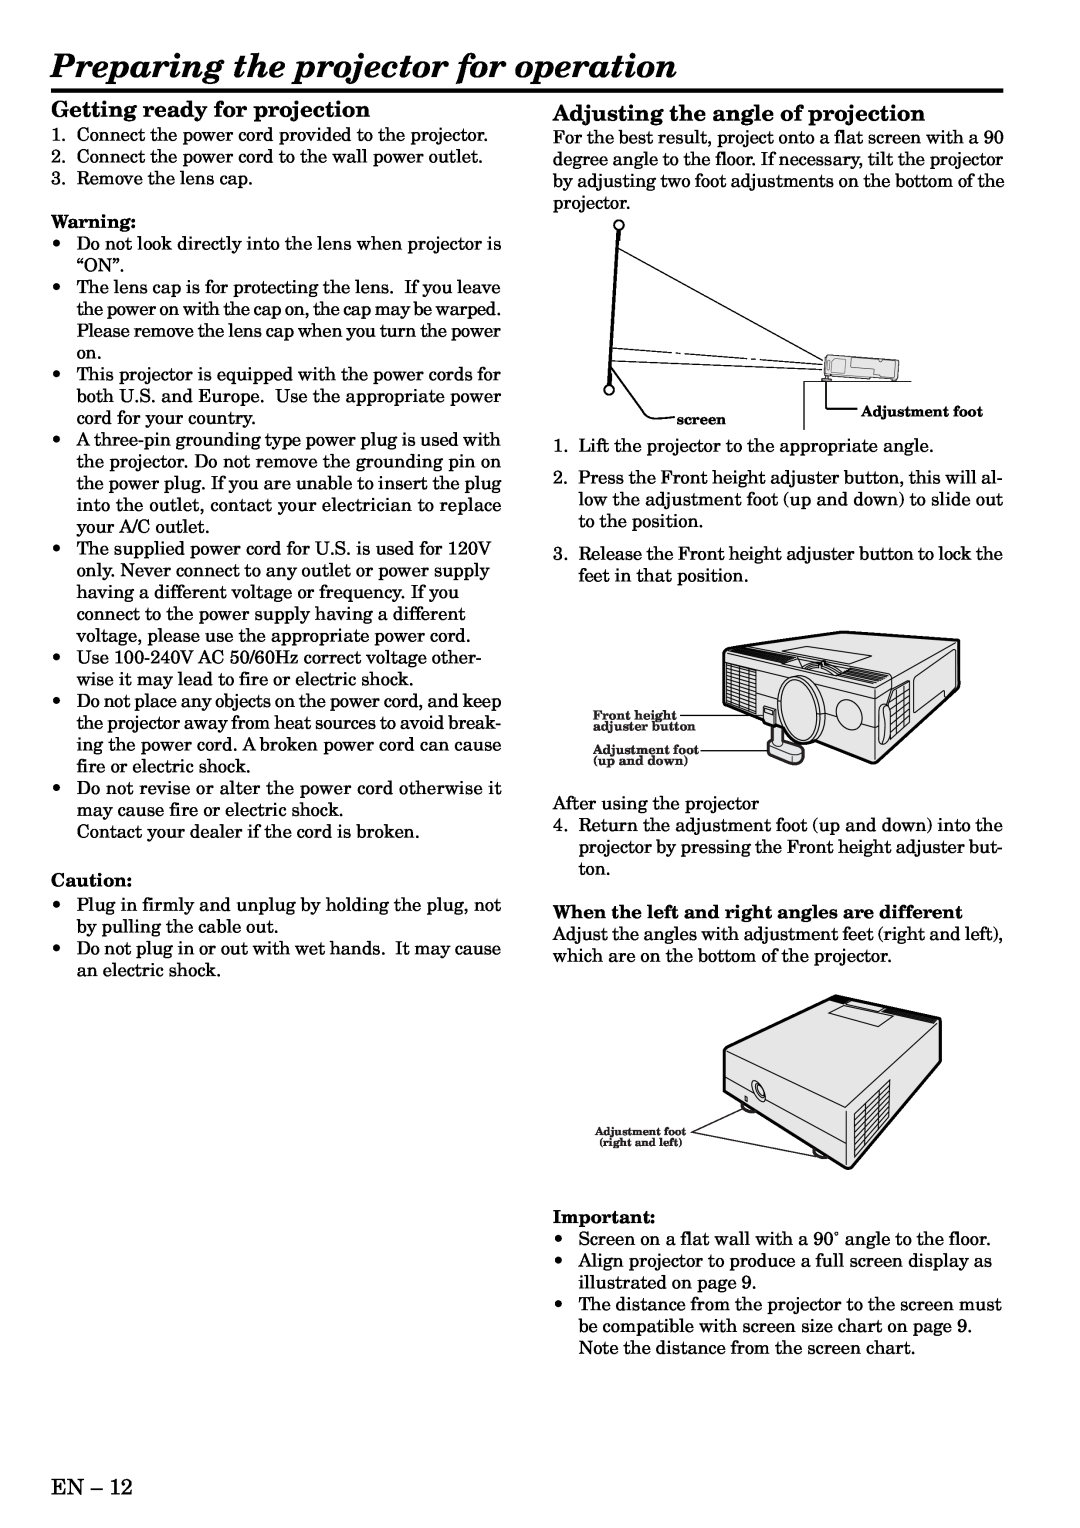 Mitsubishi Electronics X50, X70 user manual Preparing the projector for operation, Getting ready for projection 